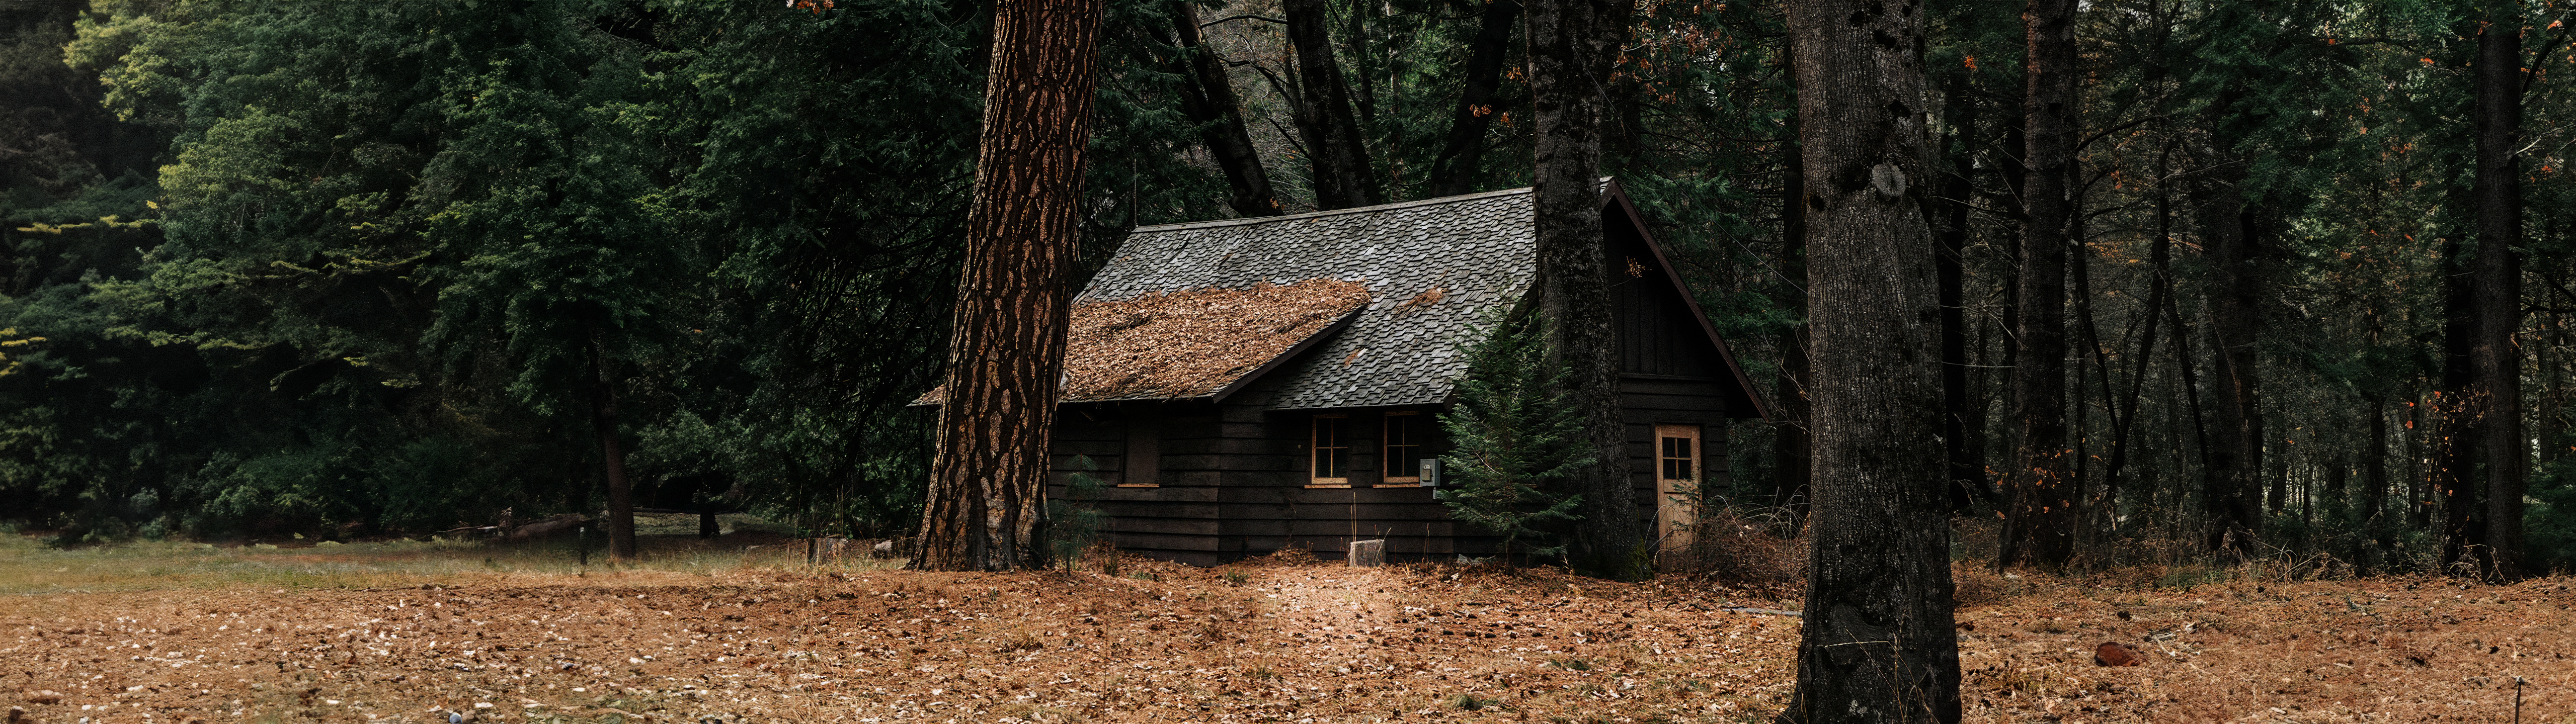 Forest Cabin Ultrawide Outdoors 5120x1440